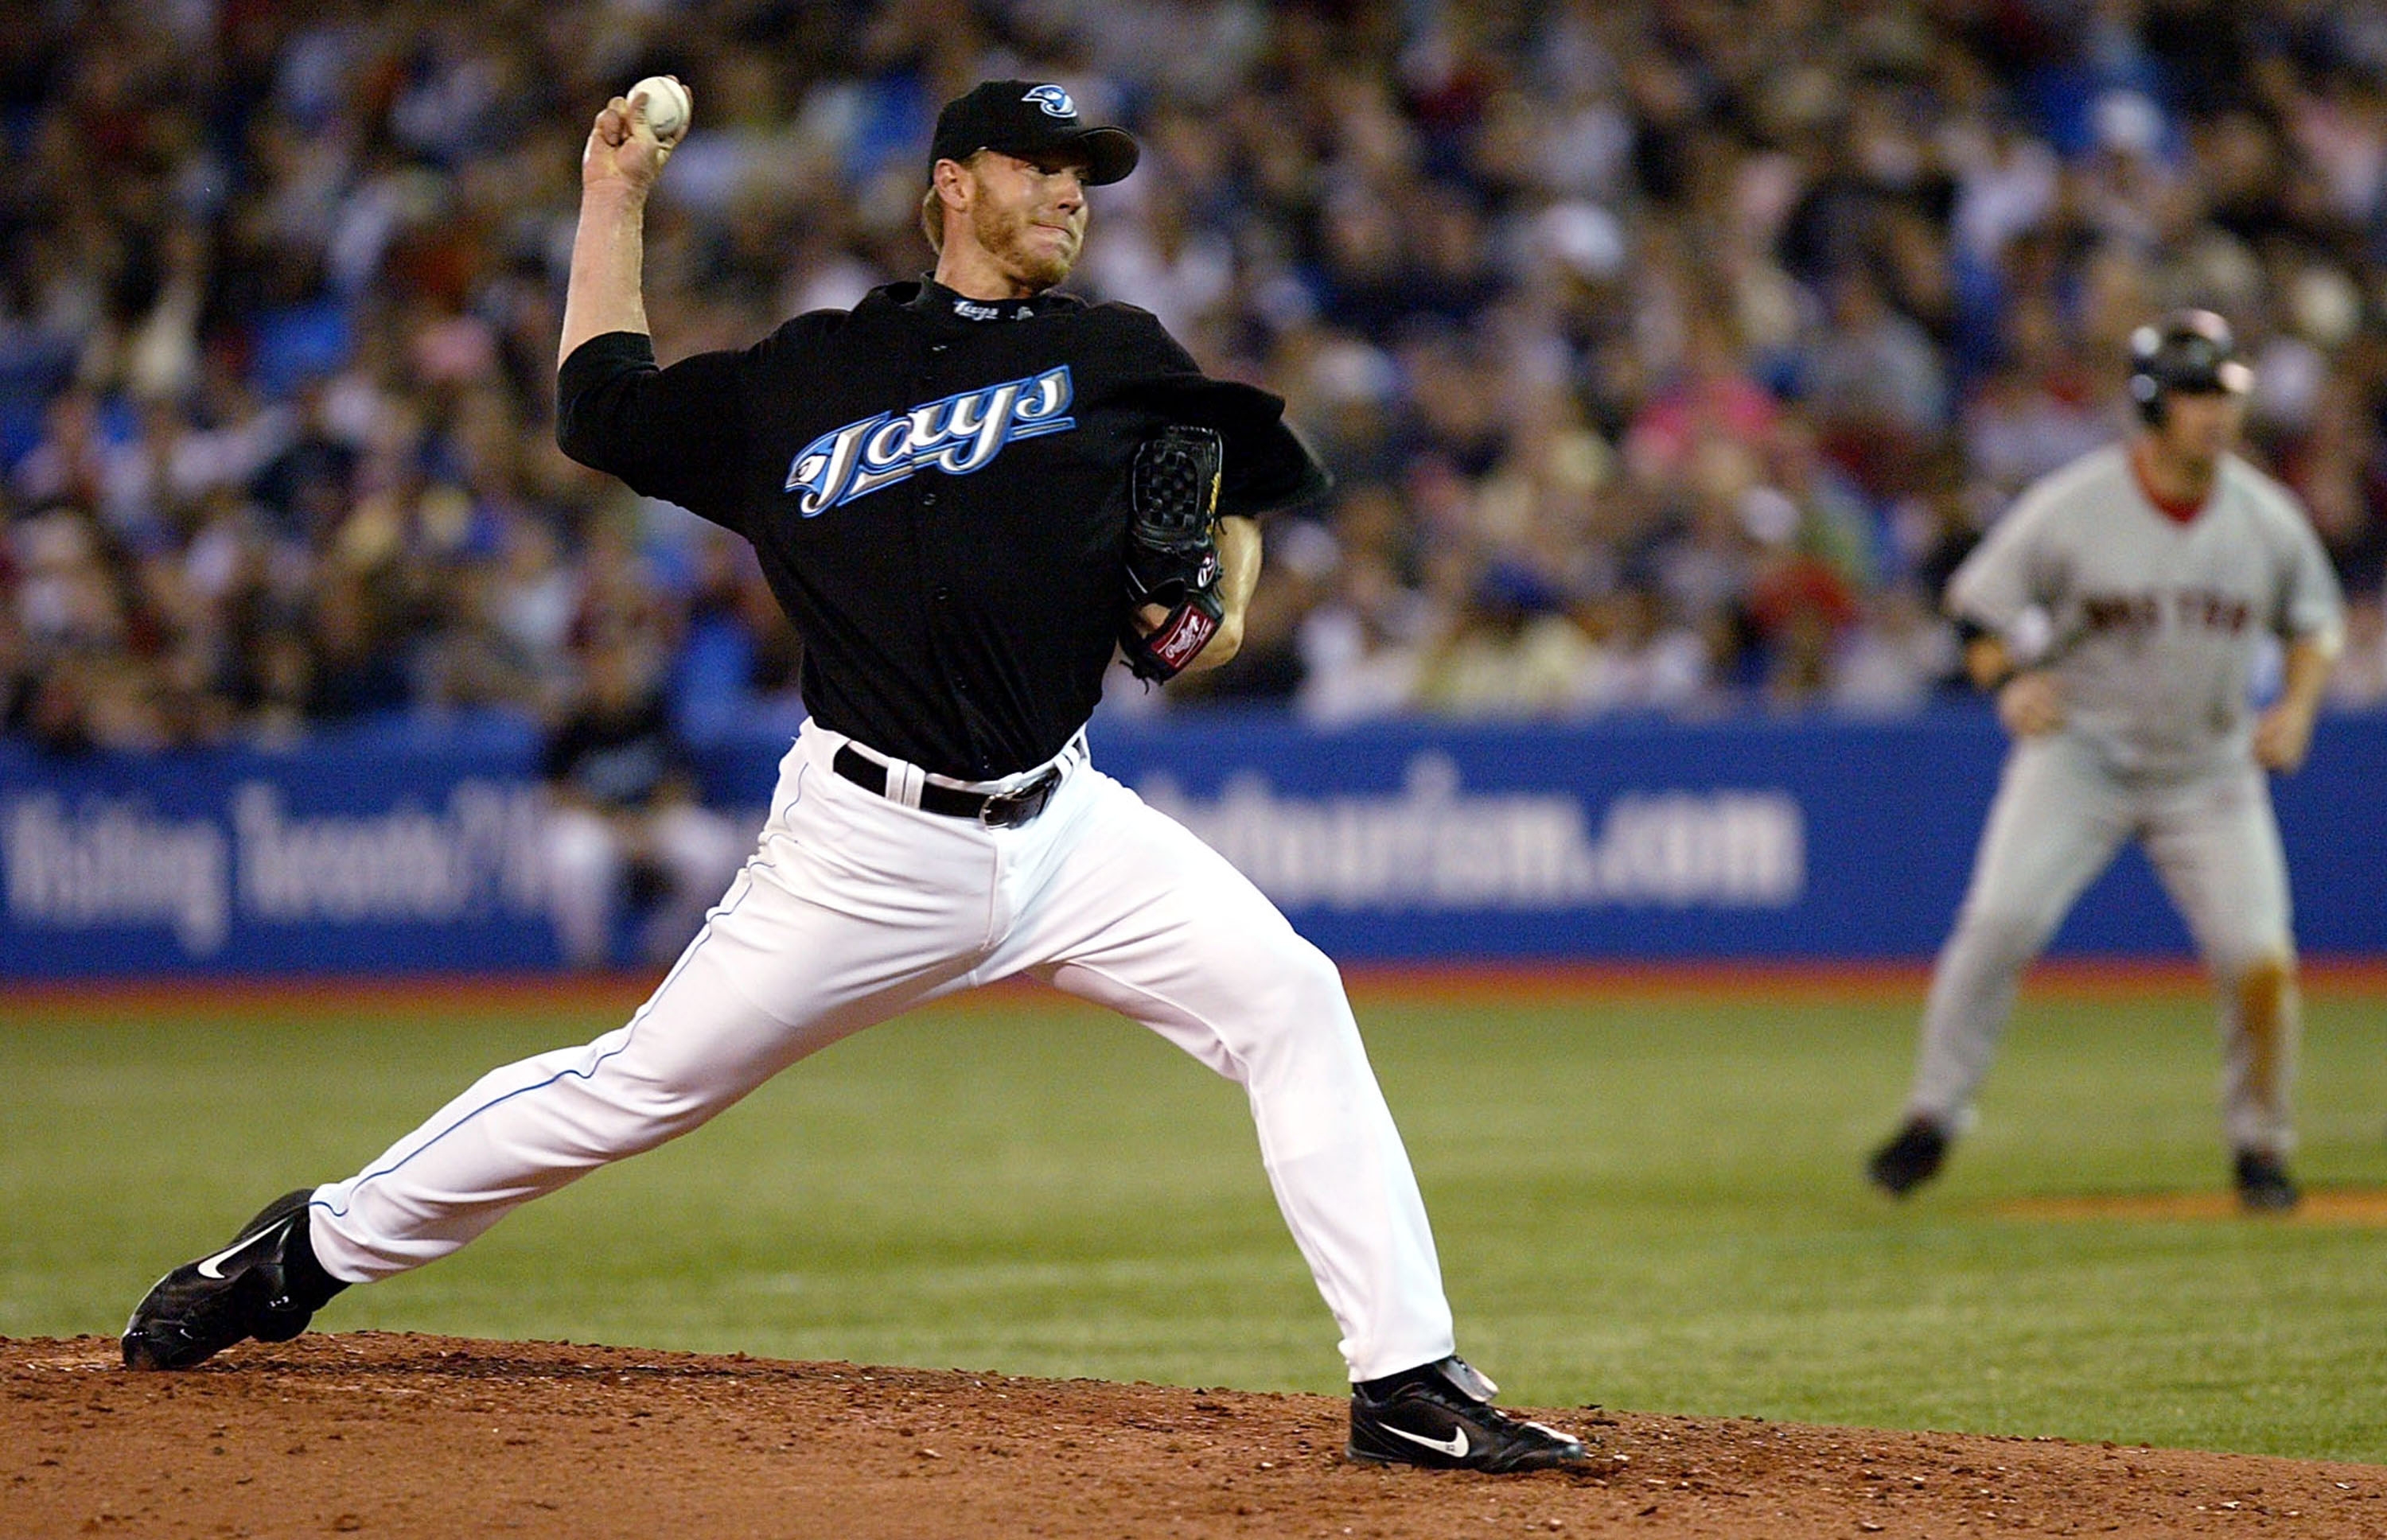 ALL THOSE DEMONS': New Roy Halladay book opens curtain on Blue Jays icon